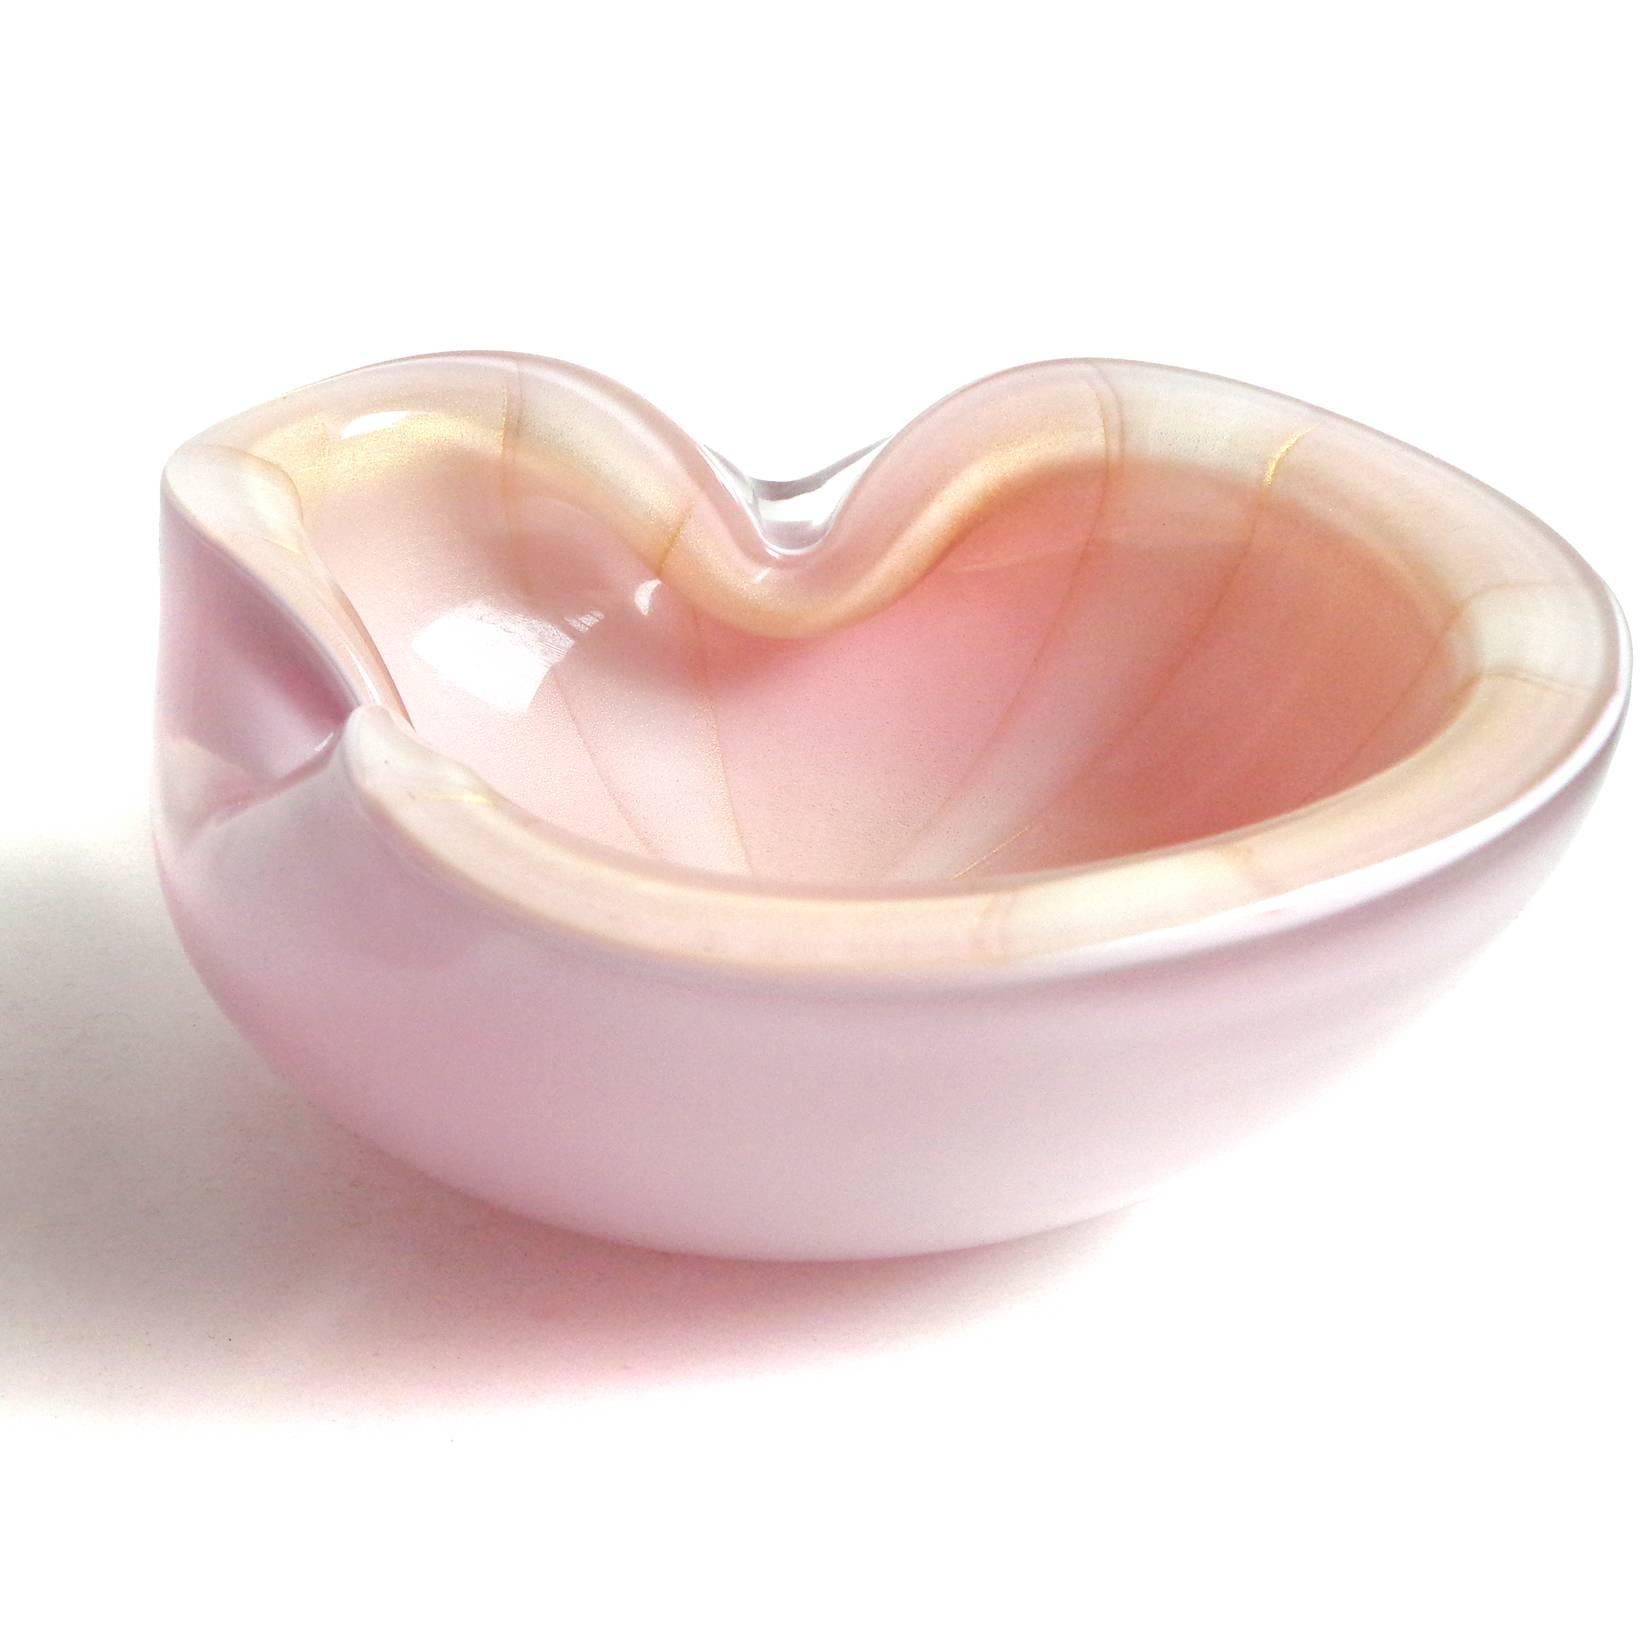 Beautiful set of vintage Murano hand blown pink, white stripes and gold flecks Italian art glass bowl set. Documented to designer Alfredo Barbini, circa 1950-1960. Can be used as a display piece on any table. Use it as a catchall, or candy dish as